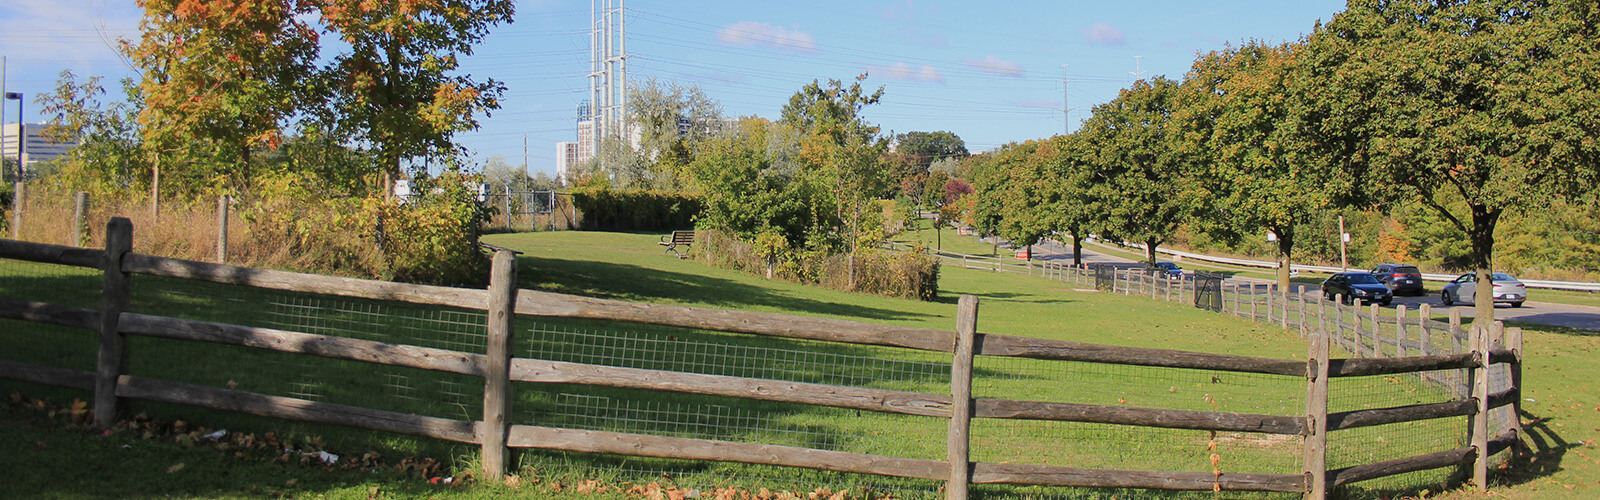 Wood and chain-link fence surrounds the Linkwood Lane Park off-leash dog area. To the right, a minor road with several cars driving along. In the background, a cell tower and a hydro field can be seen in the distance. Lush trees and greenery scattered throughout the area.